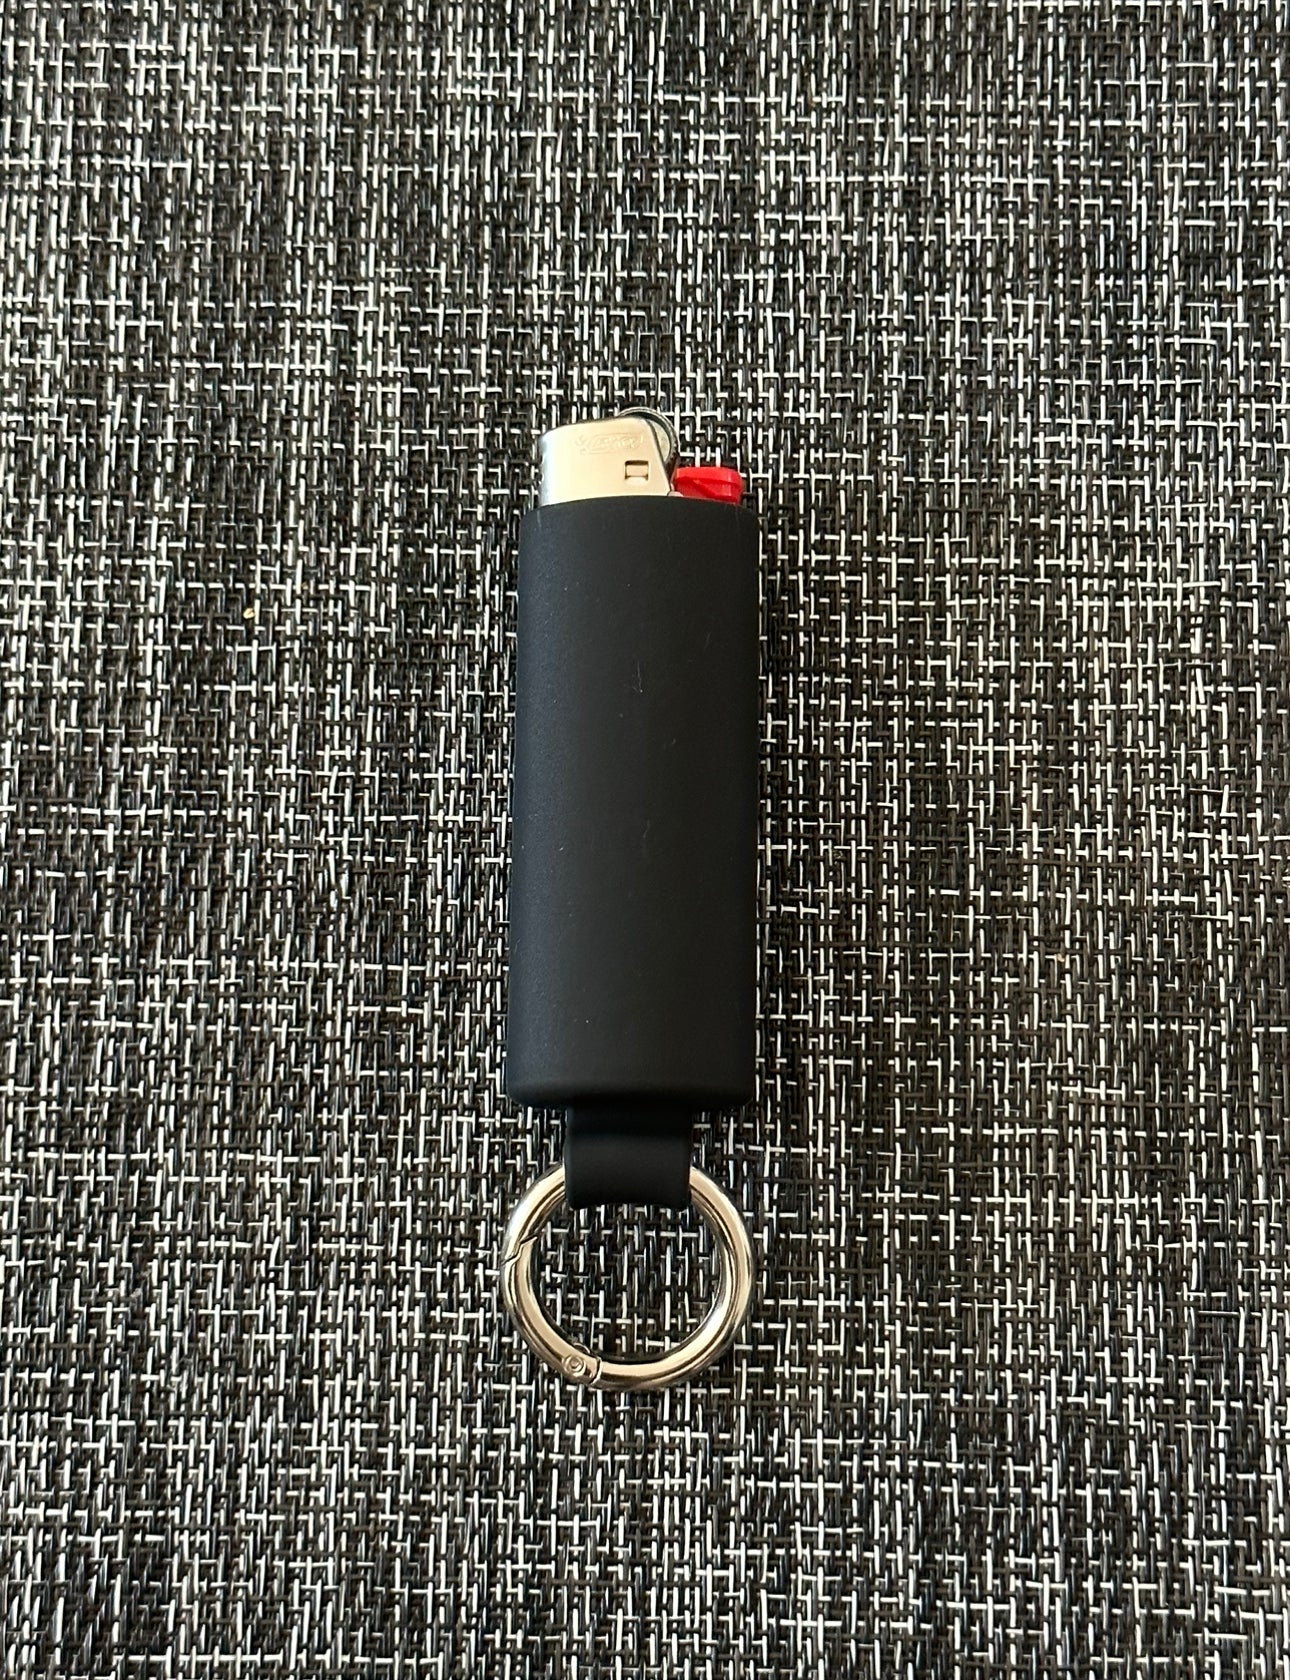 Black Lighter Holder Keychain with Spring Clip made by Lighter Locators